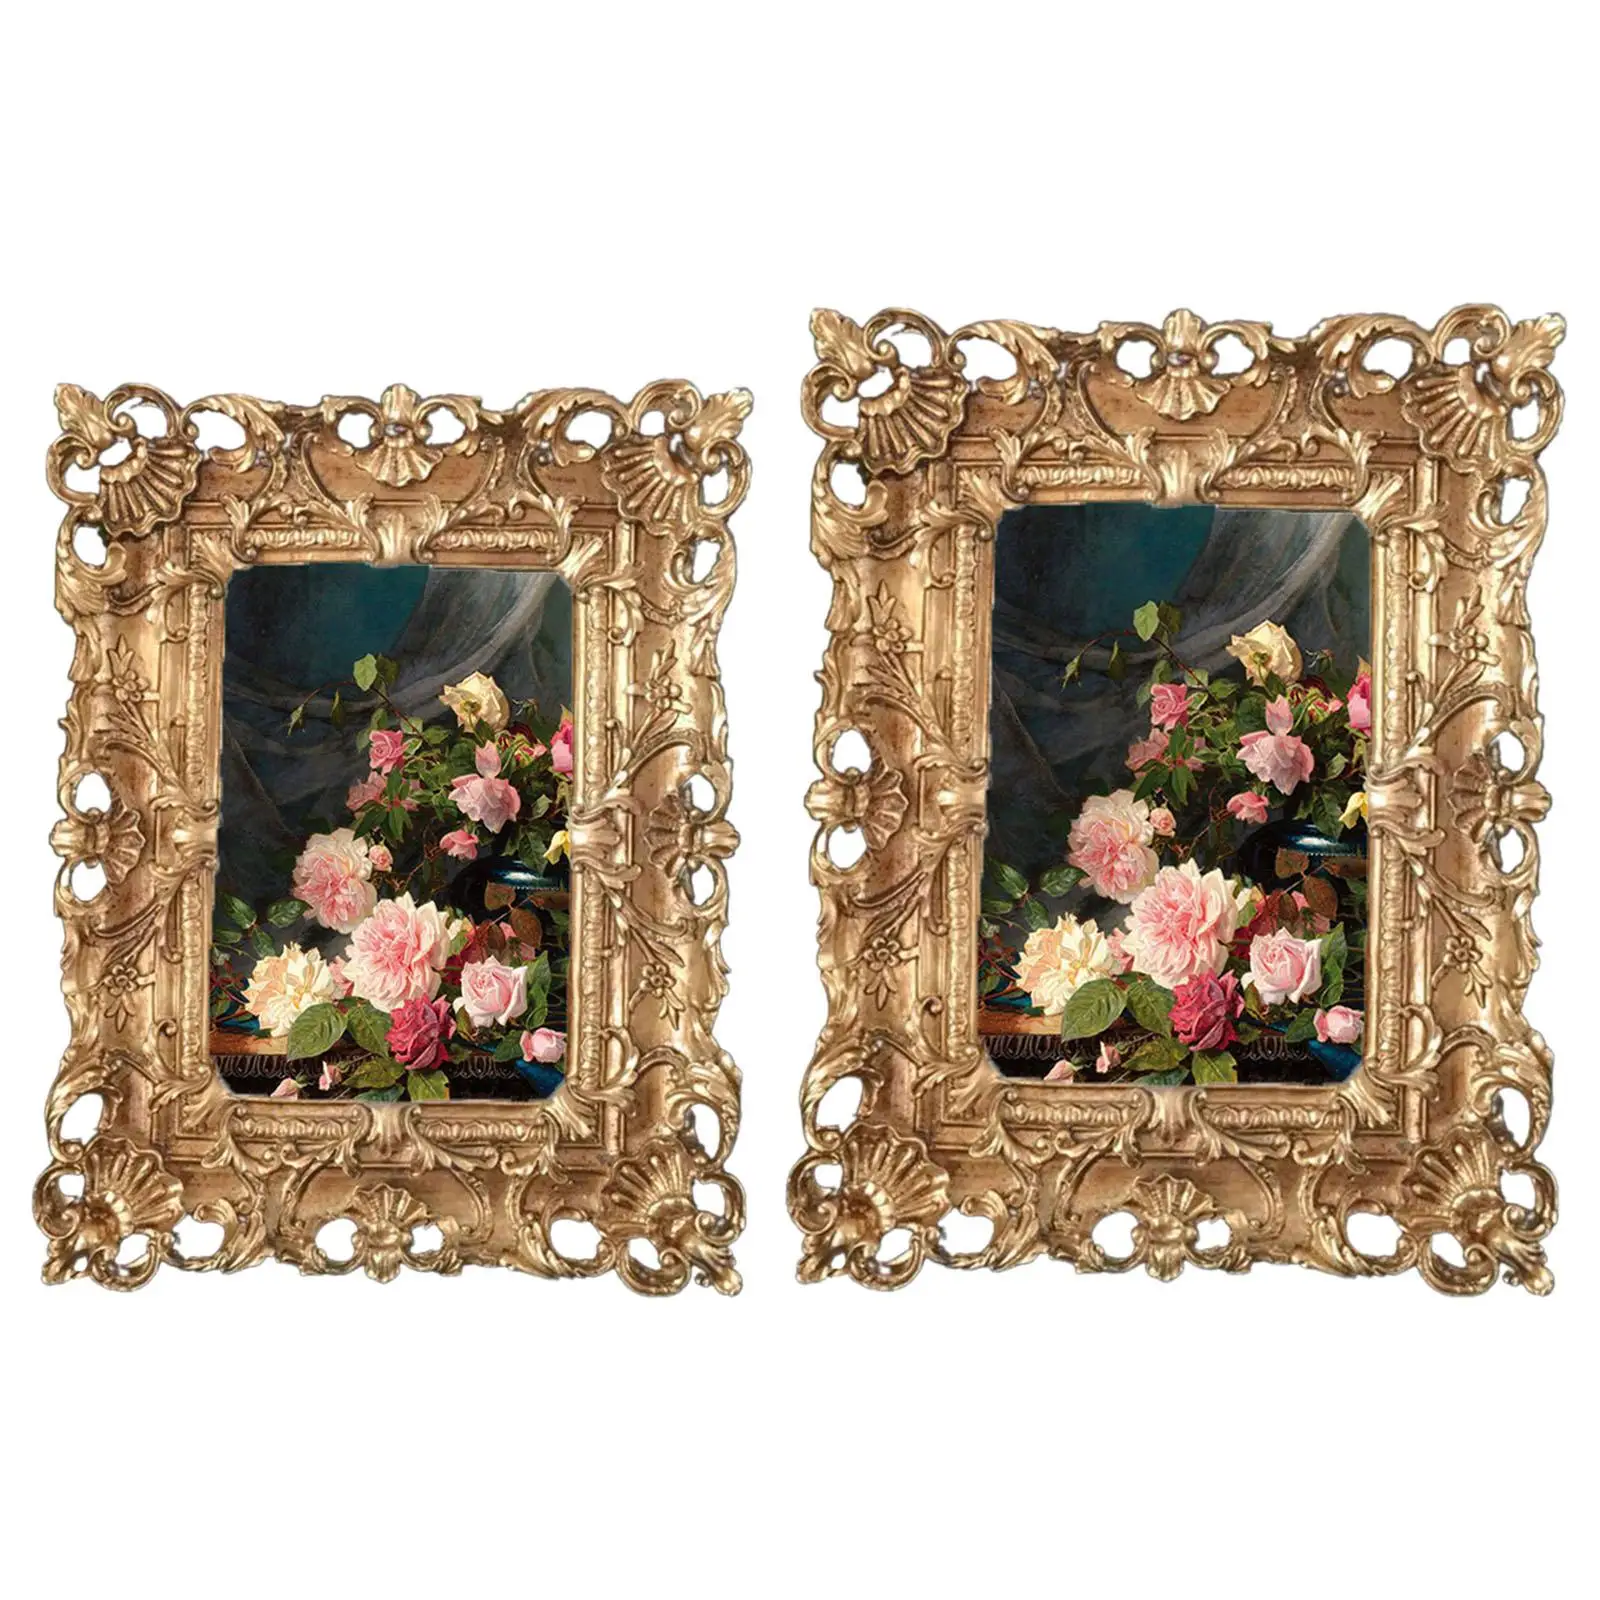 Retro Style Picture Frame Picture   Desktop Free Standing Ornate